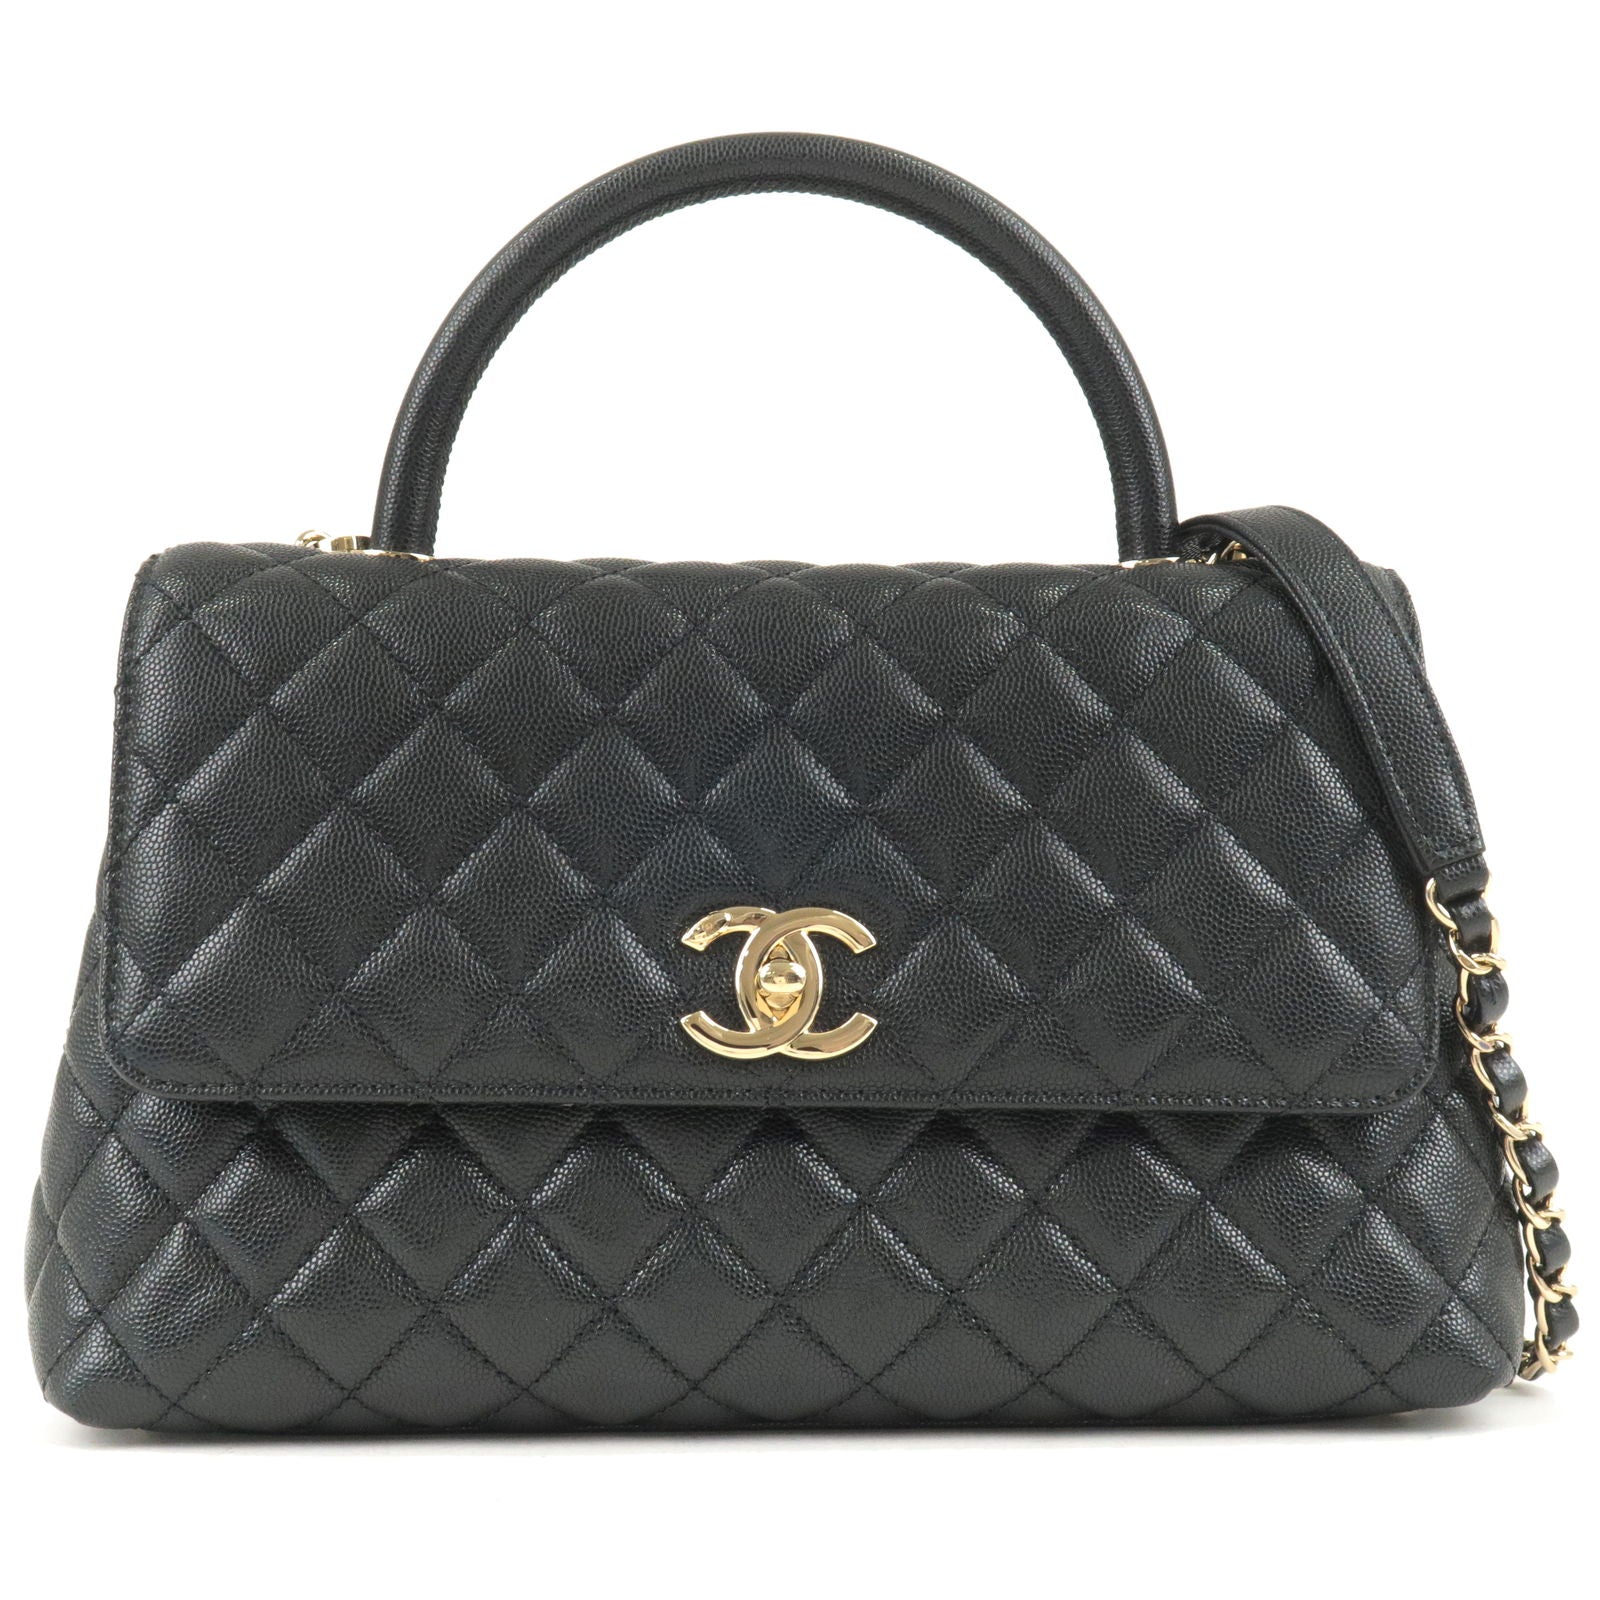 CHANEL, Bags, 28 Chanel Medium Coco Luxe Flap Bag